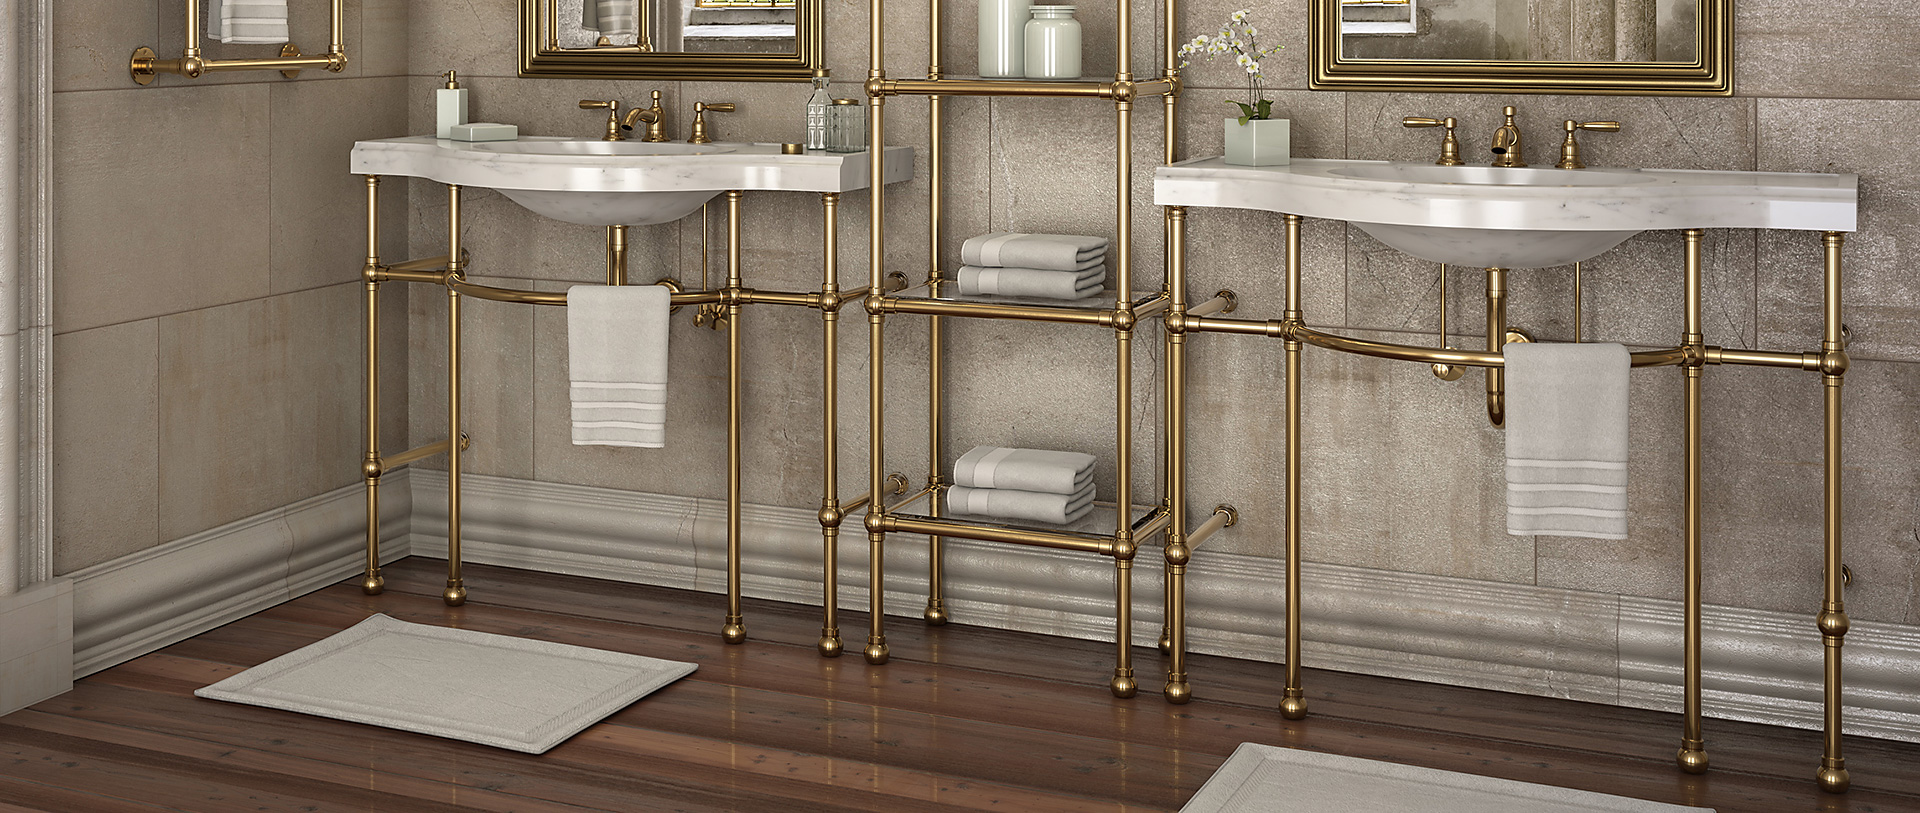 Renaissance style brass metal console sink legs with matching etagere shelving